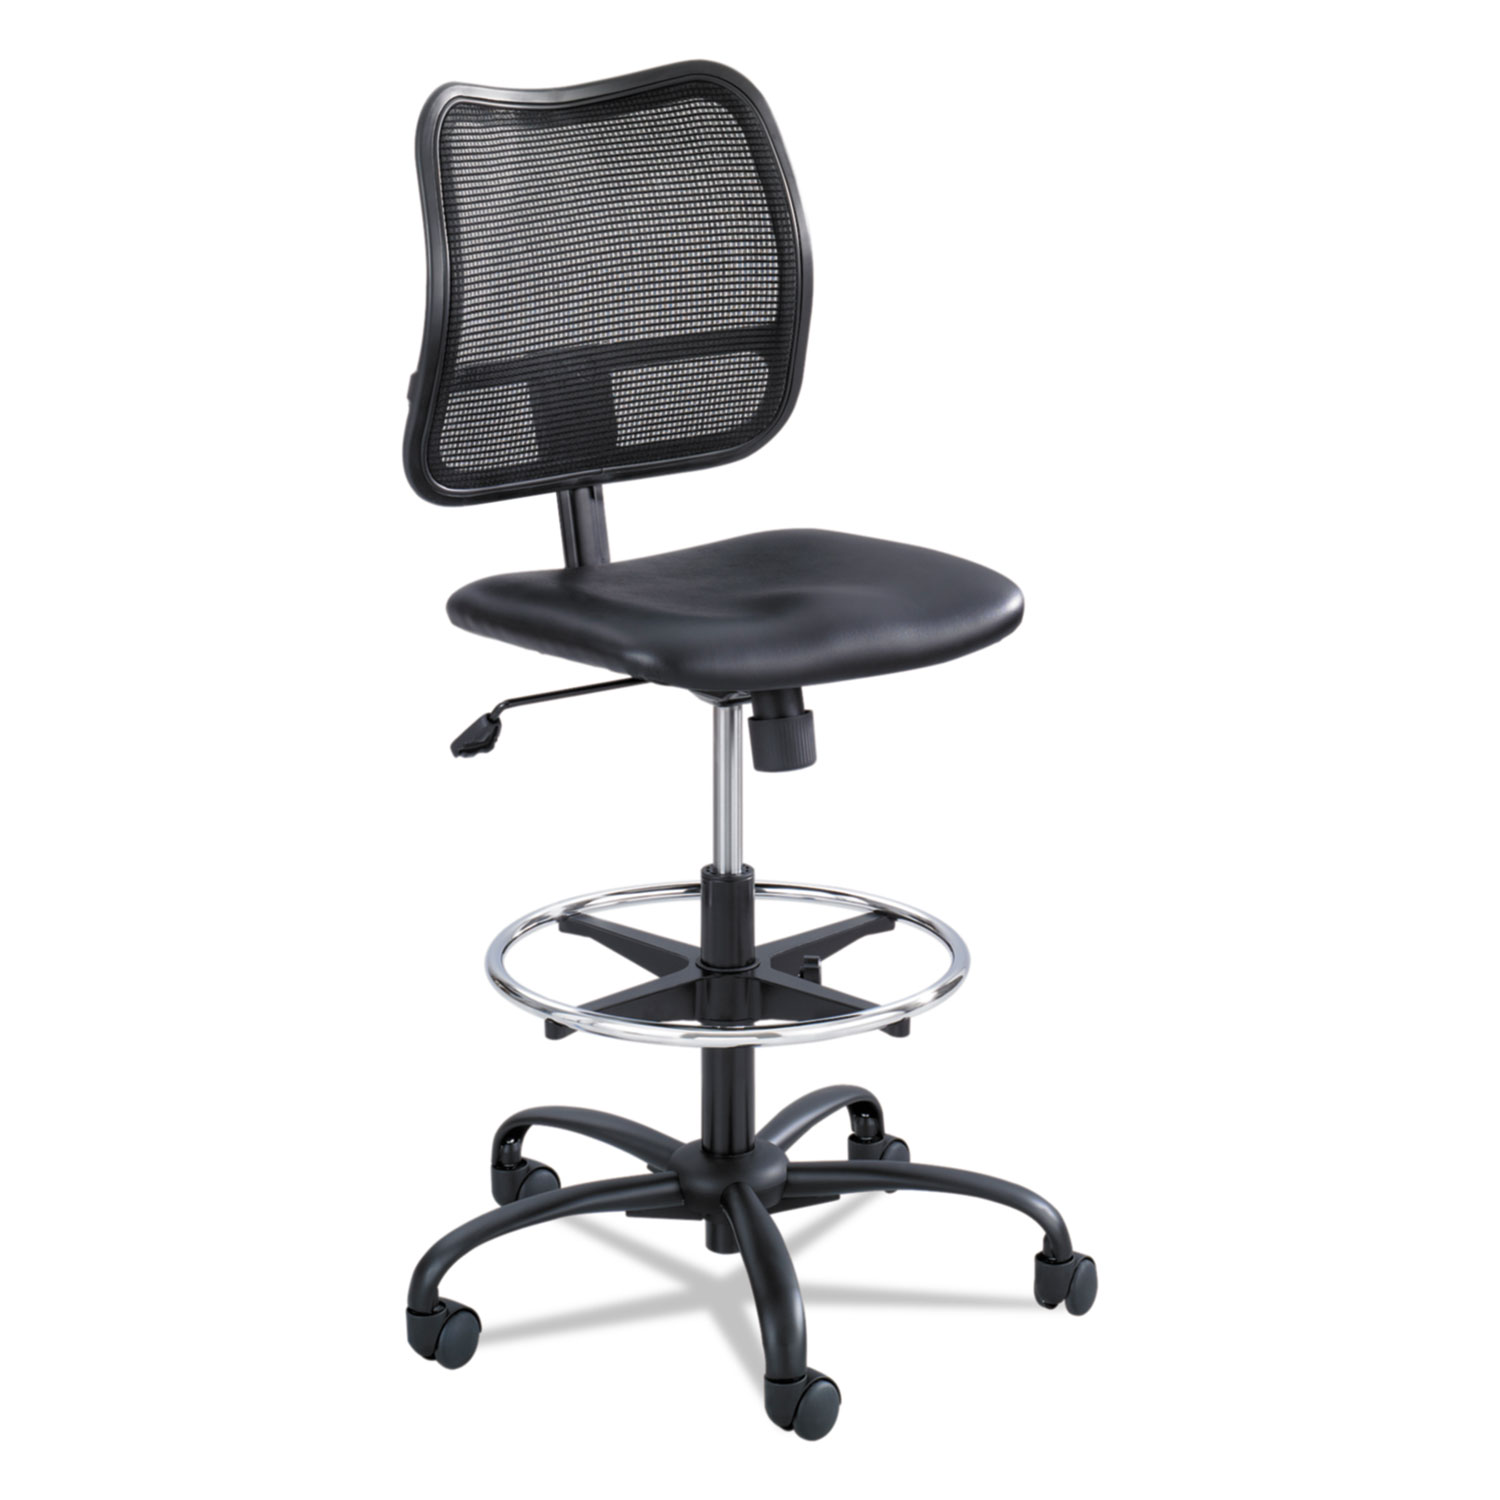  Safco 3395BV Vue Series Mesh Extended-Height Chair, 33 Seat Height, Supports up to 250 lbs., Black Seat/Black Back, Black Base (SAF3395BV) 